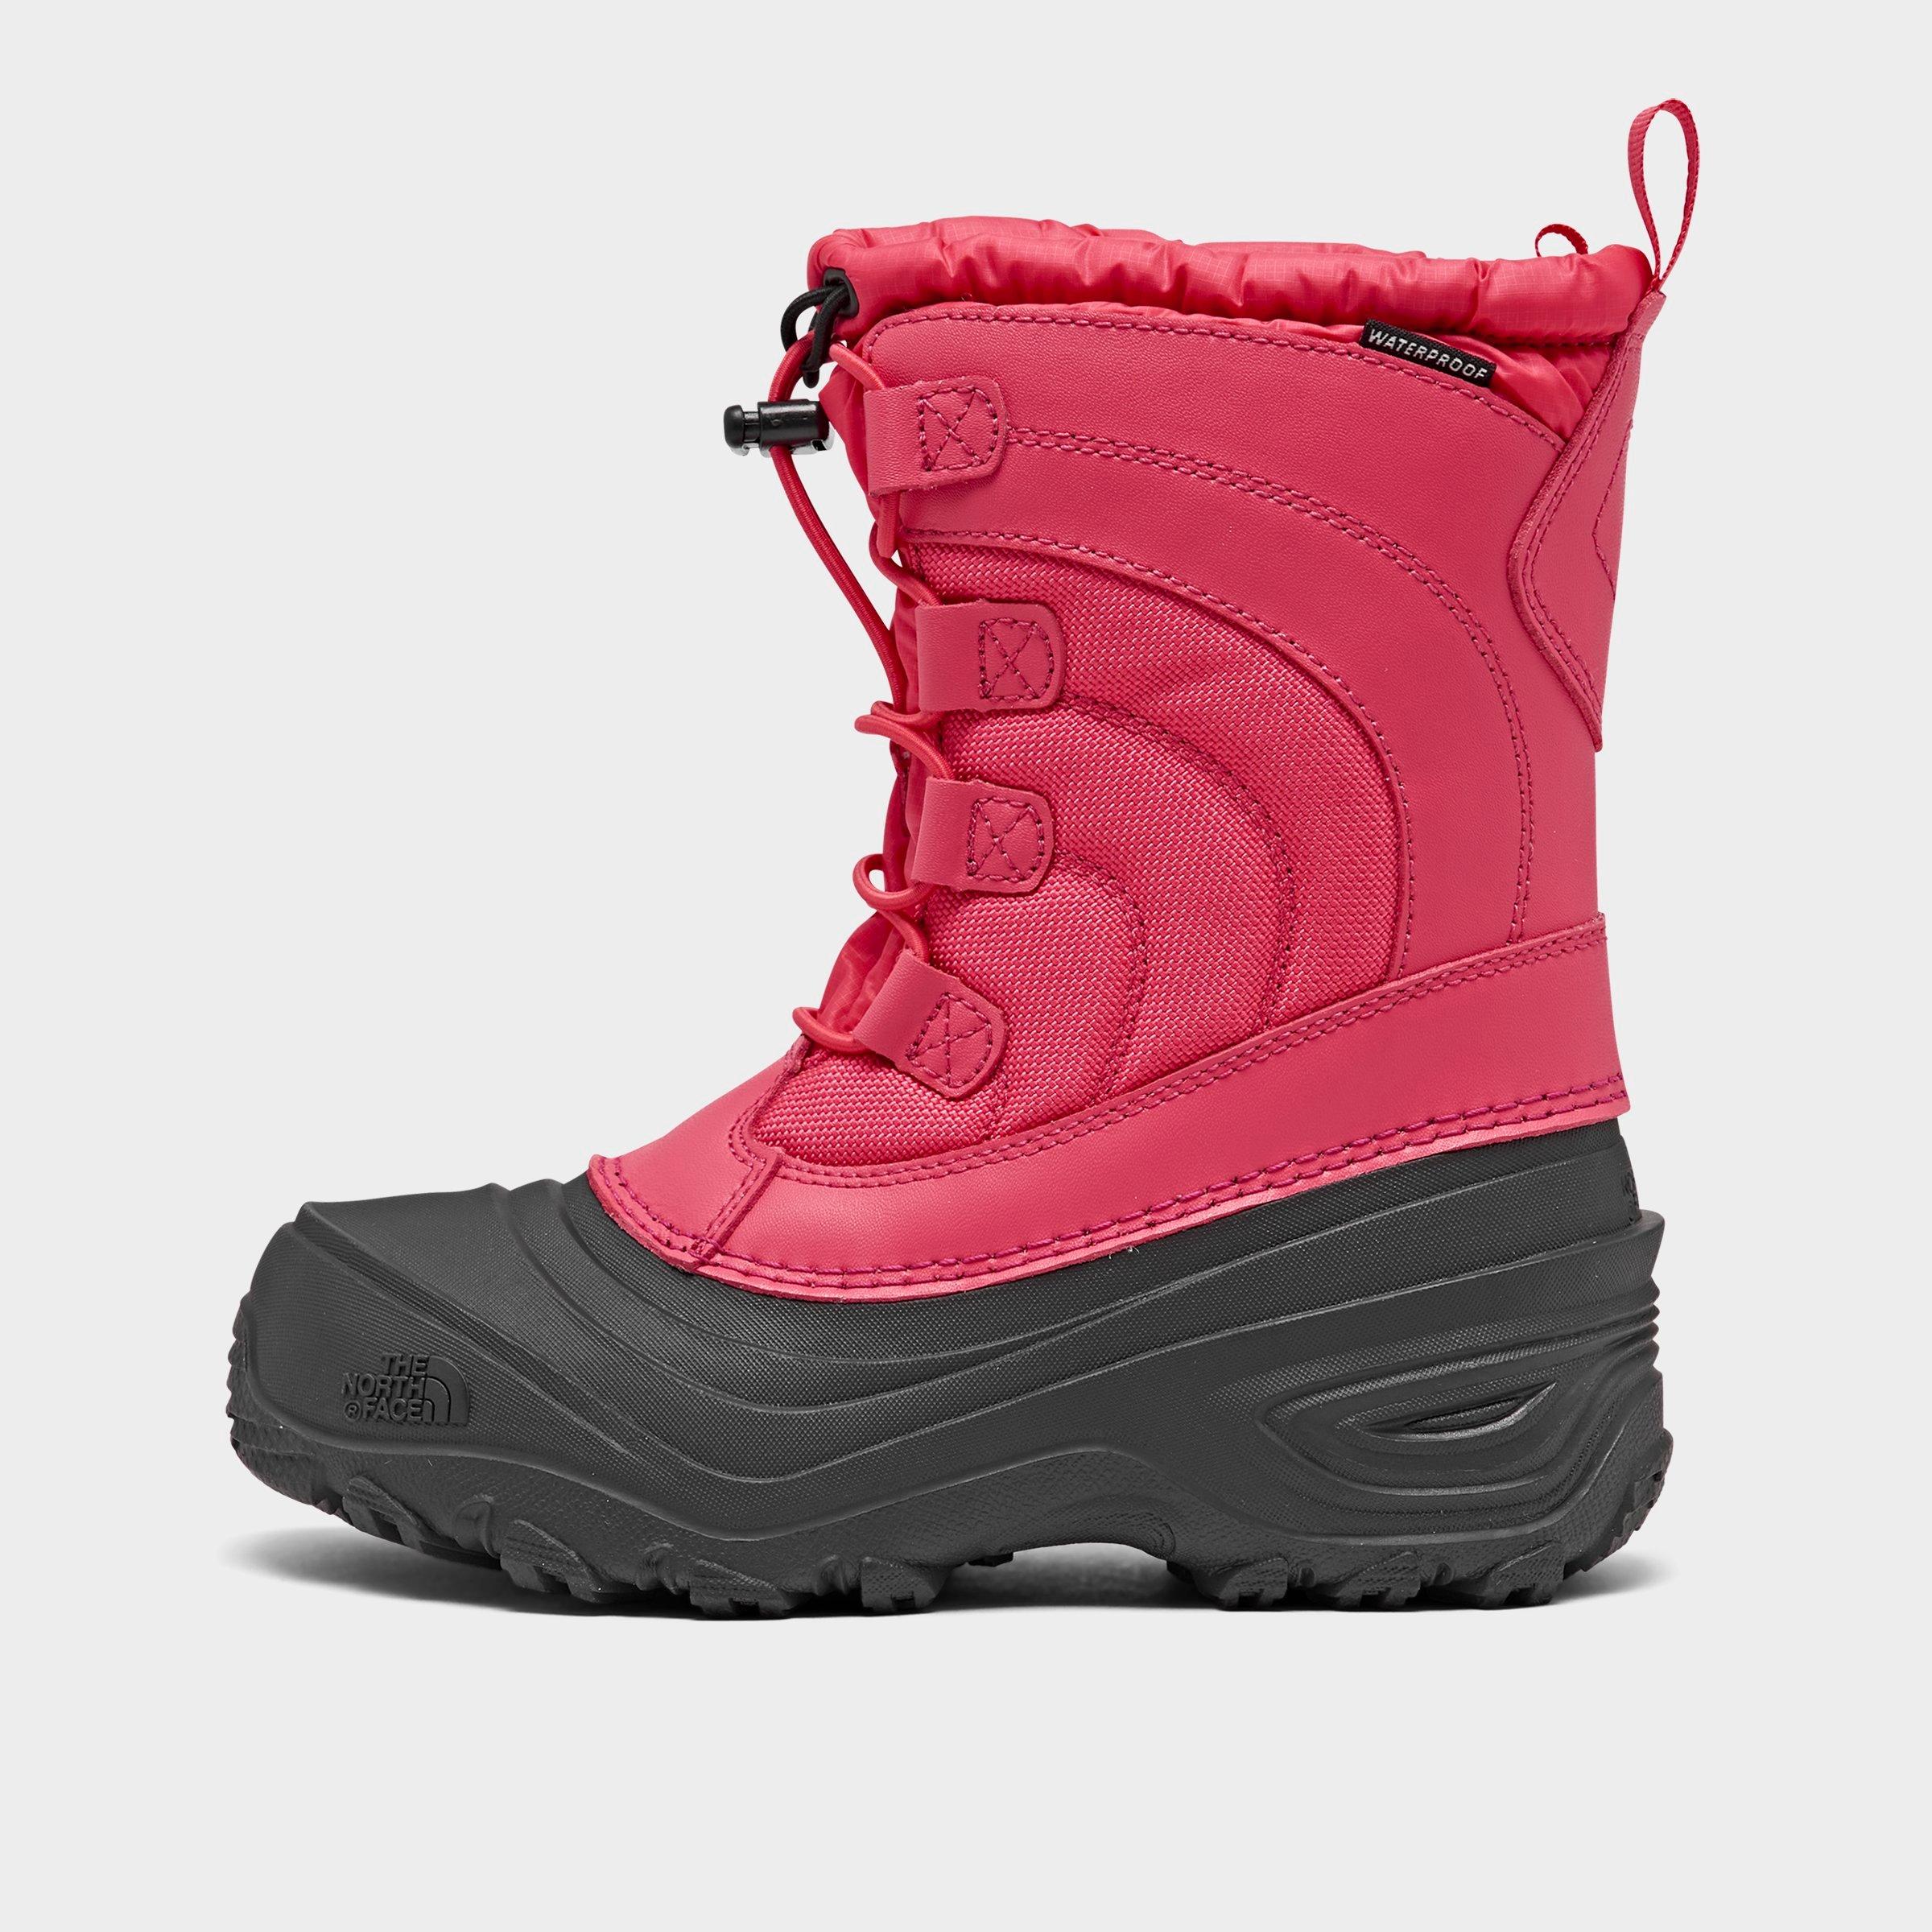 north face alpenglow iv